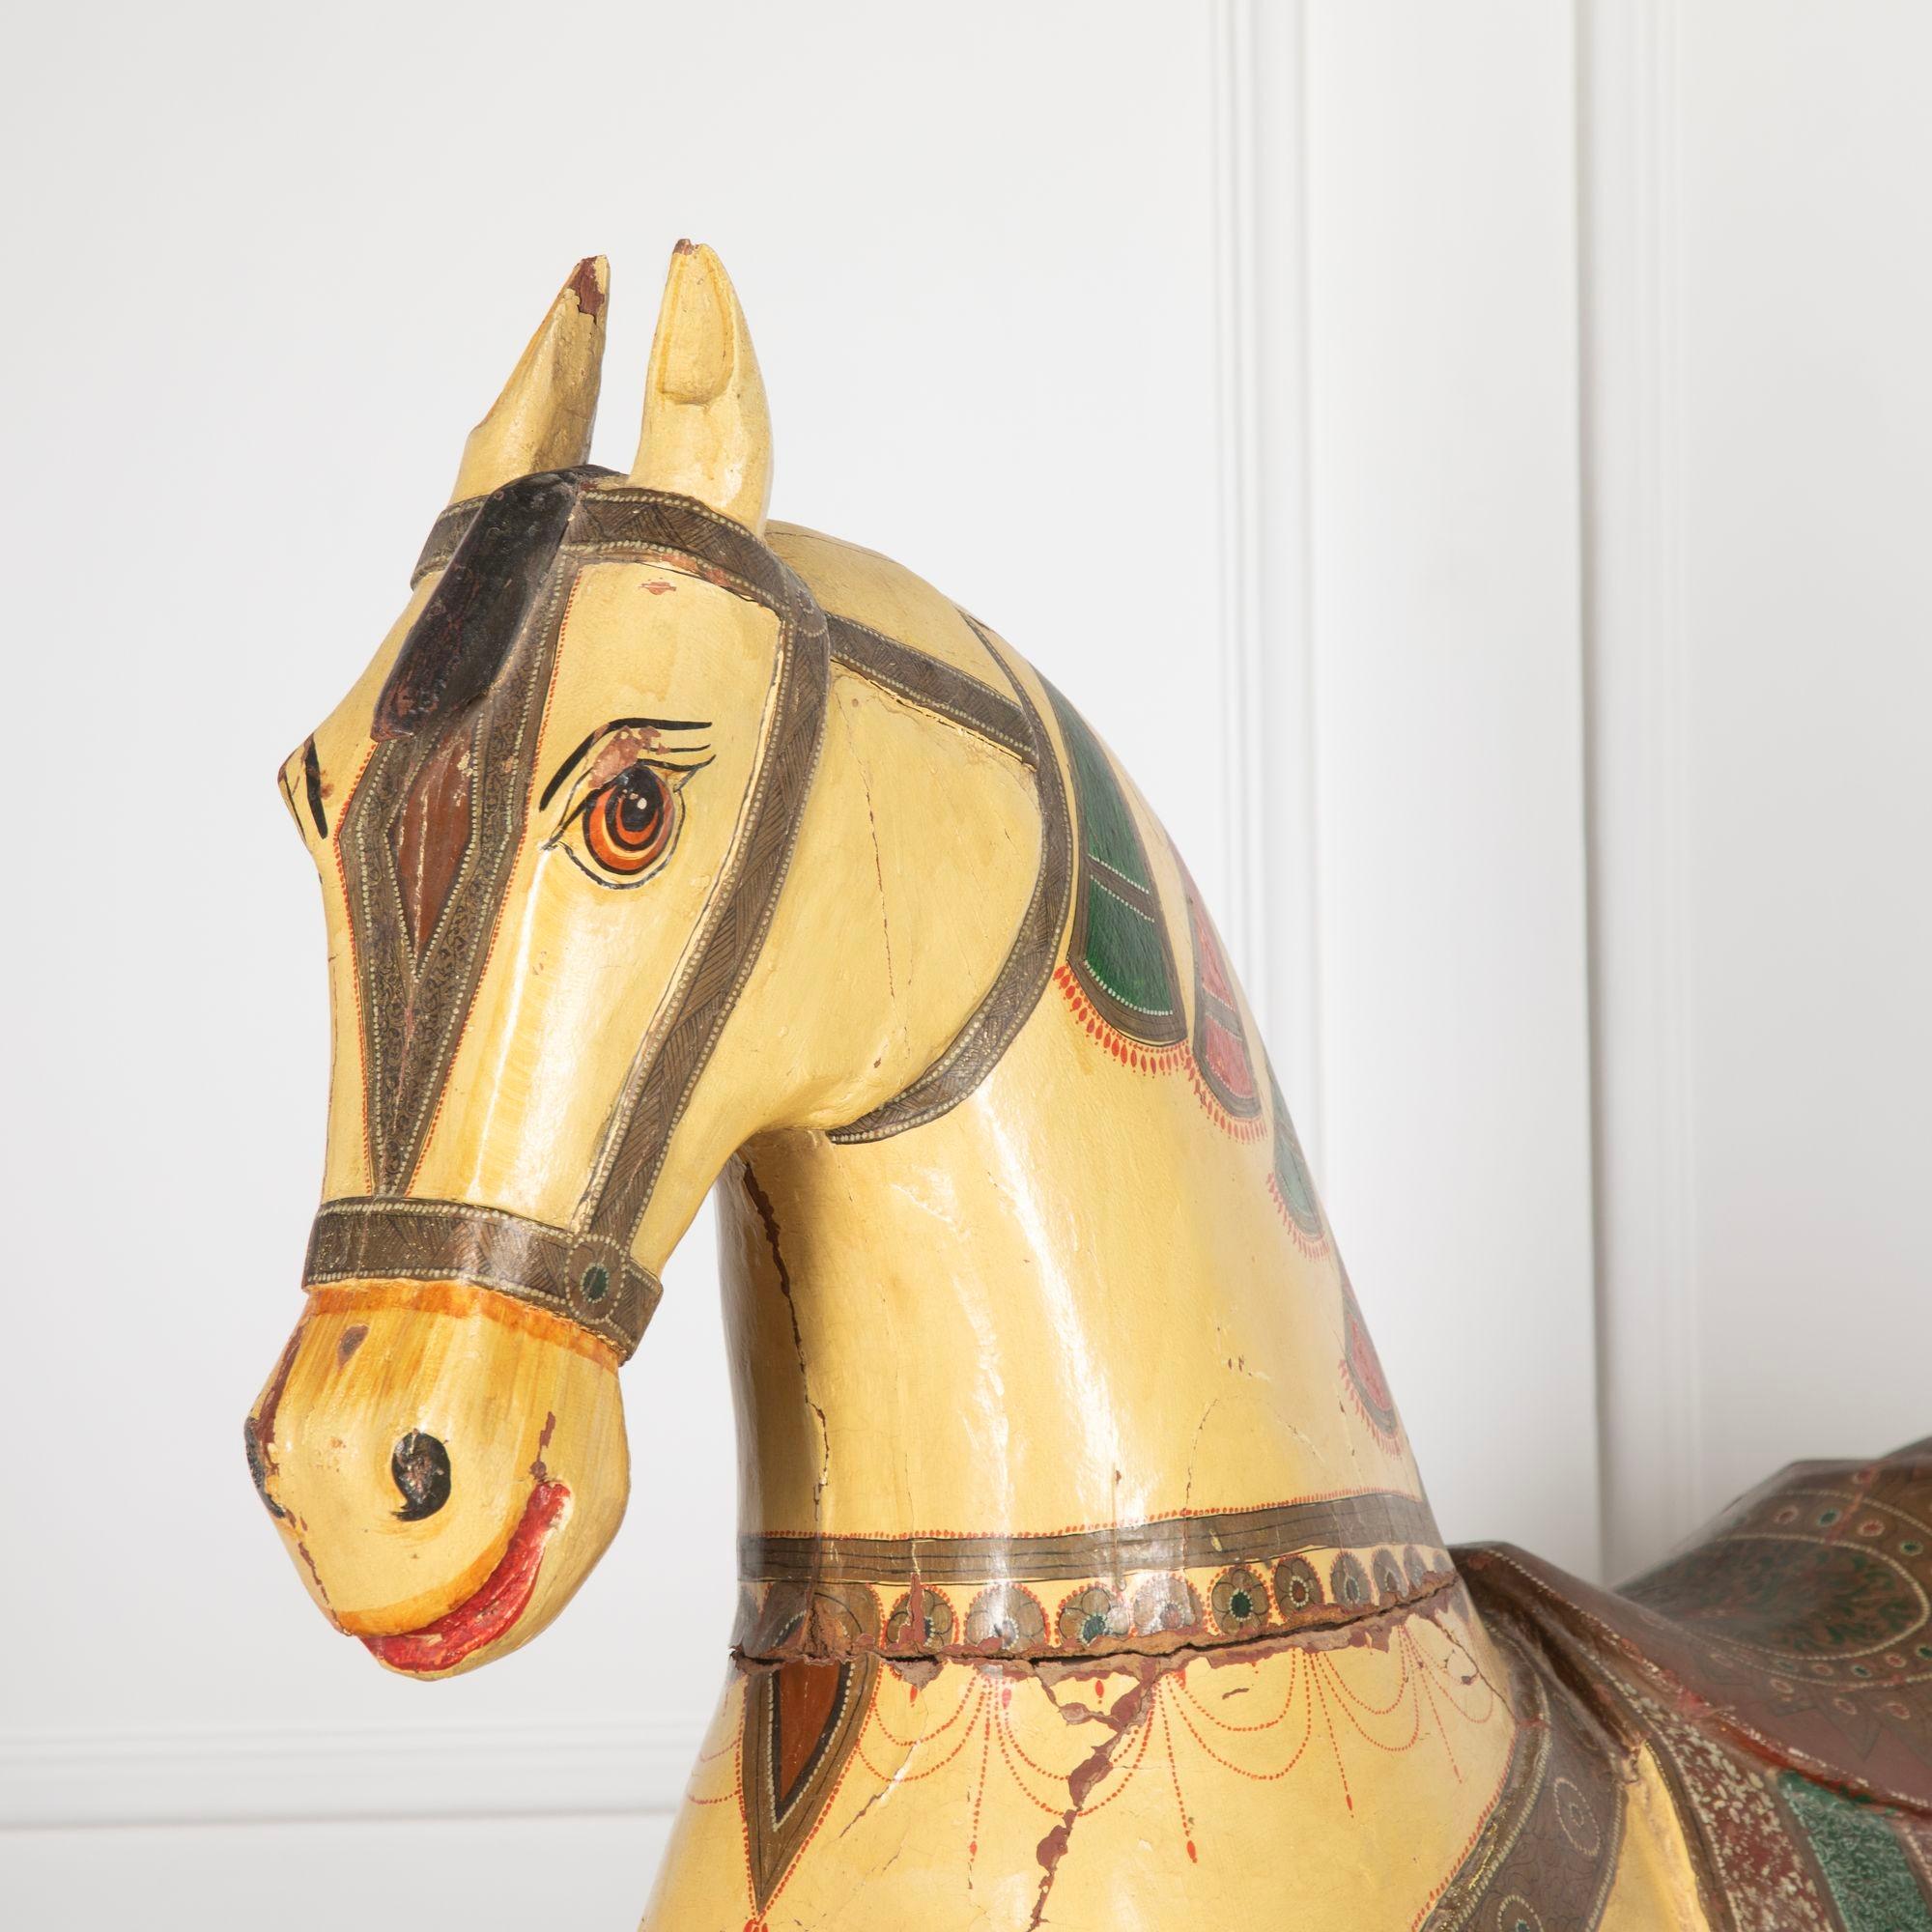 19th Century Rajasthani wedding horse.
In carved wood and elaborately painted decoration to the saddle - a model of a white mare or 'ghodi'.